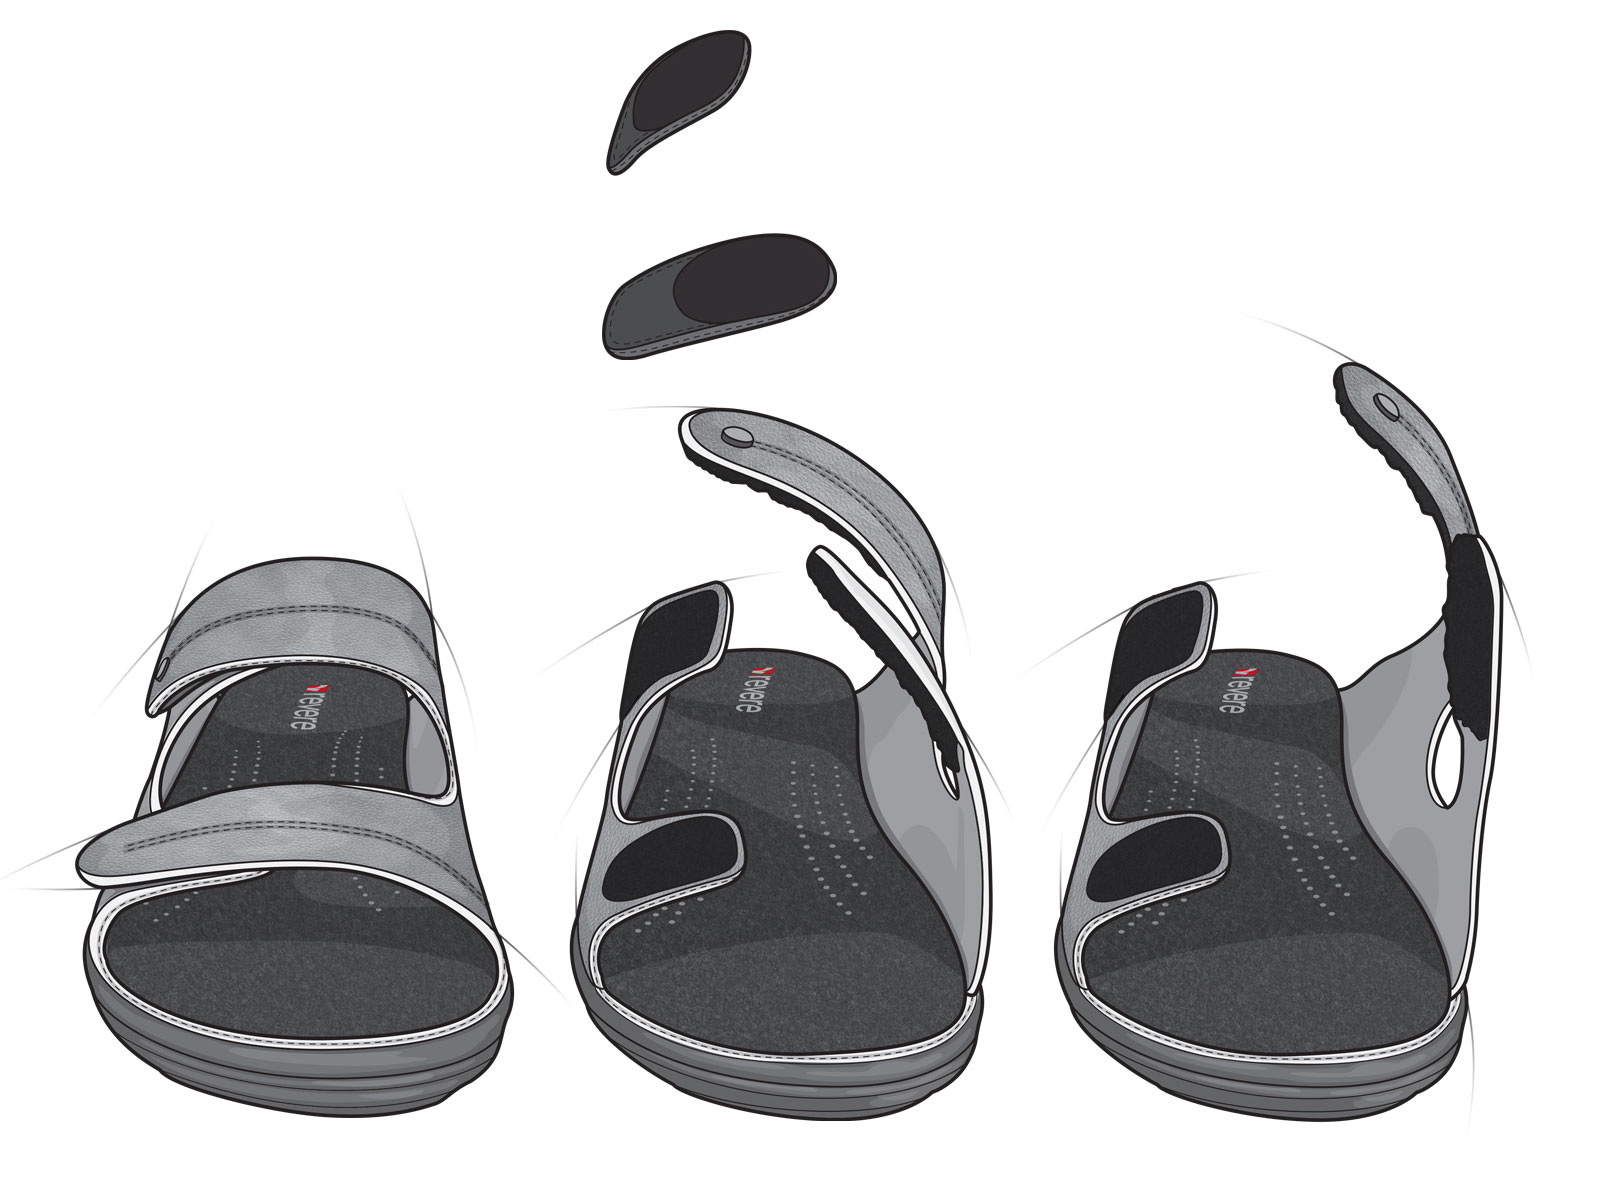 Technical illustration showing medical footware assembly